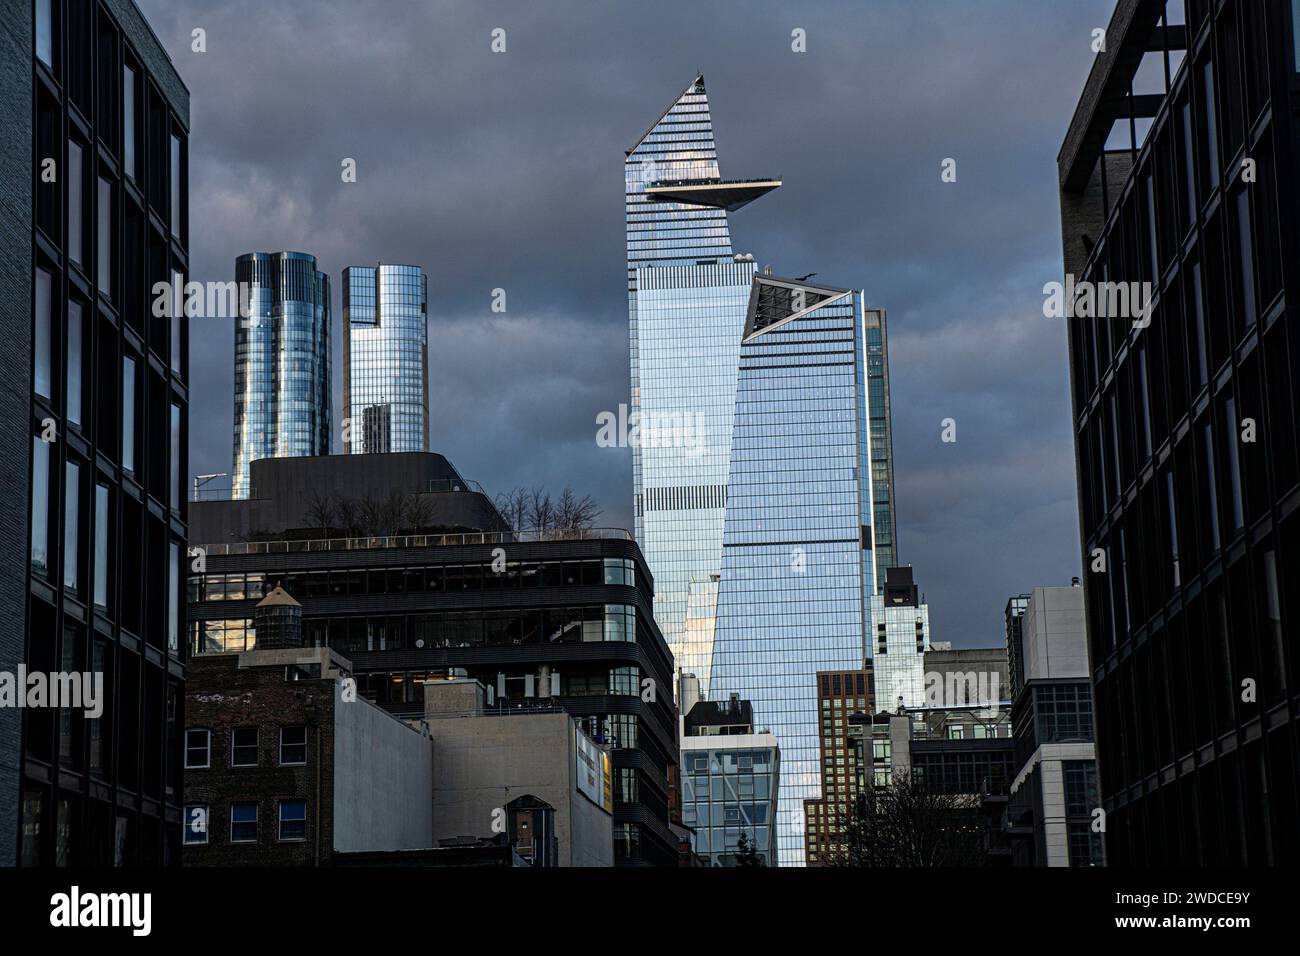 Cityscape with dramatic sky, view looking north from Chelsea neighborhood to 10 Hudson Yards and 30 Hudson Yards, New York City, New York, USA Stock Photo